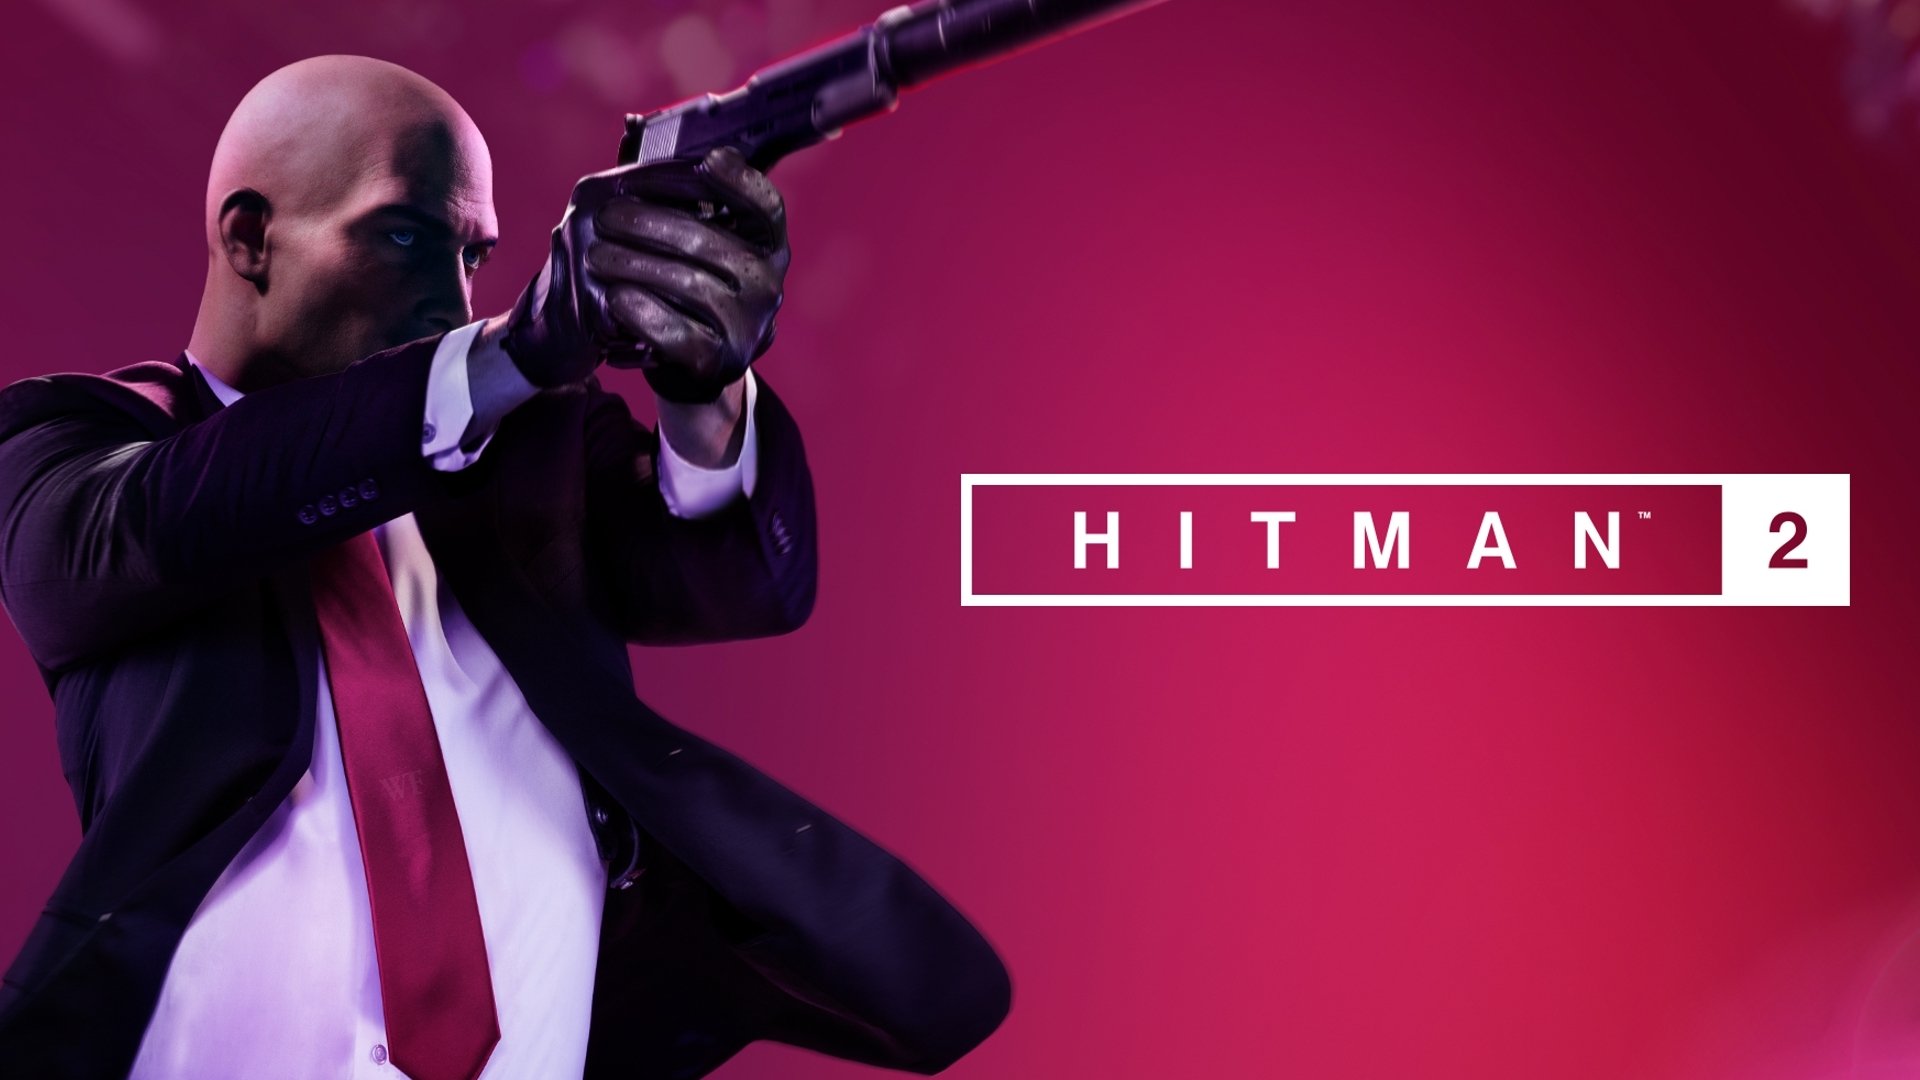 download hitman mobile apk for free